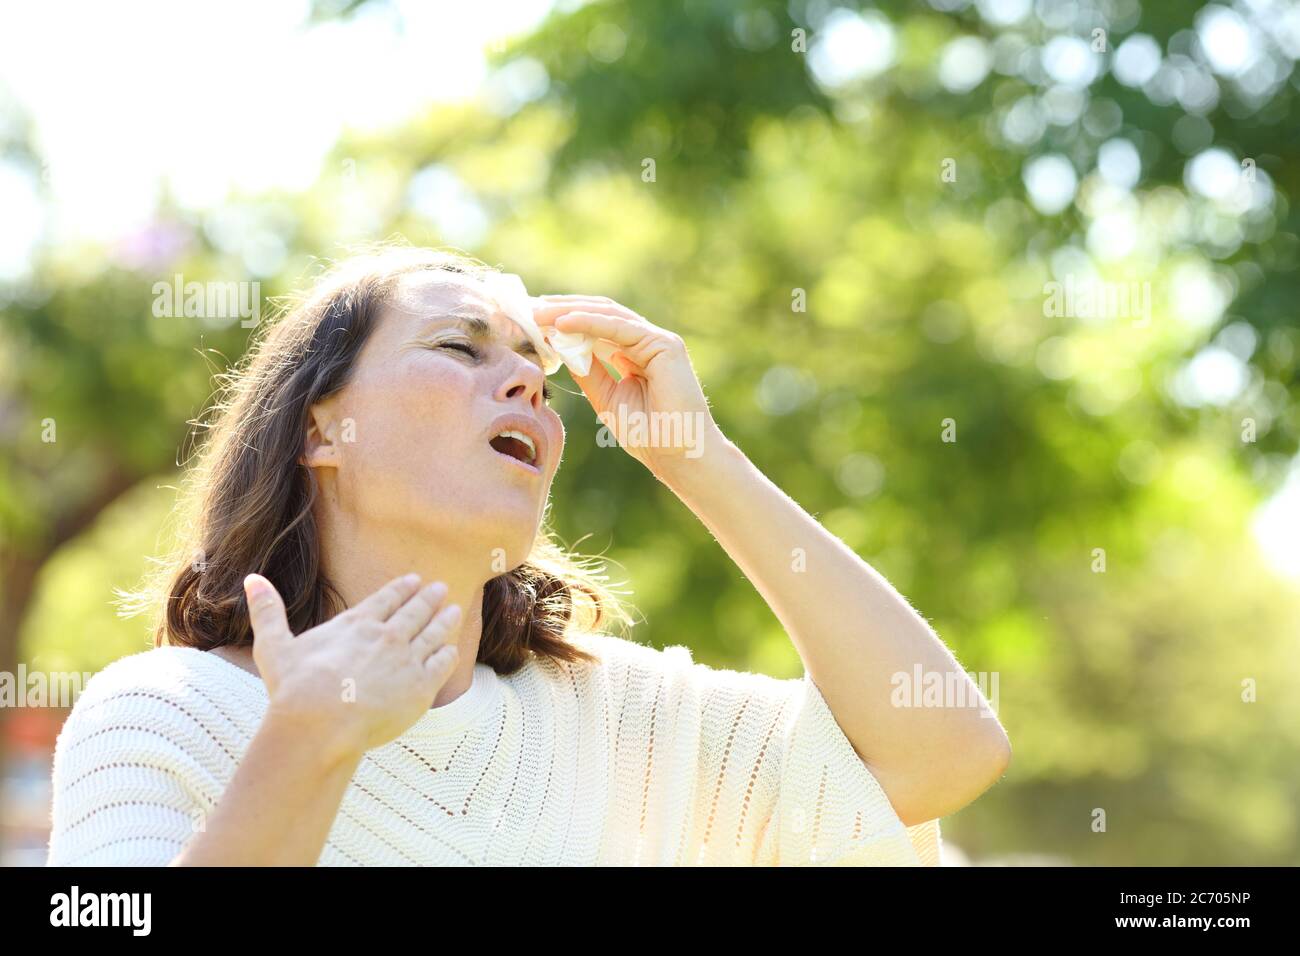 Adult woman sweating suffering heat stroke cleaning with tissue in the park Stock Photo